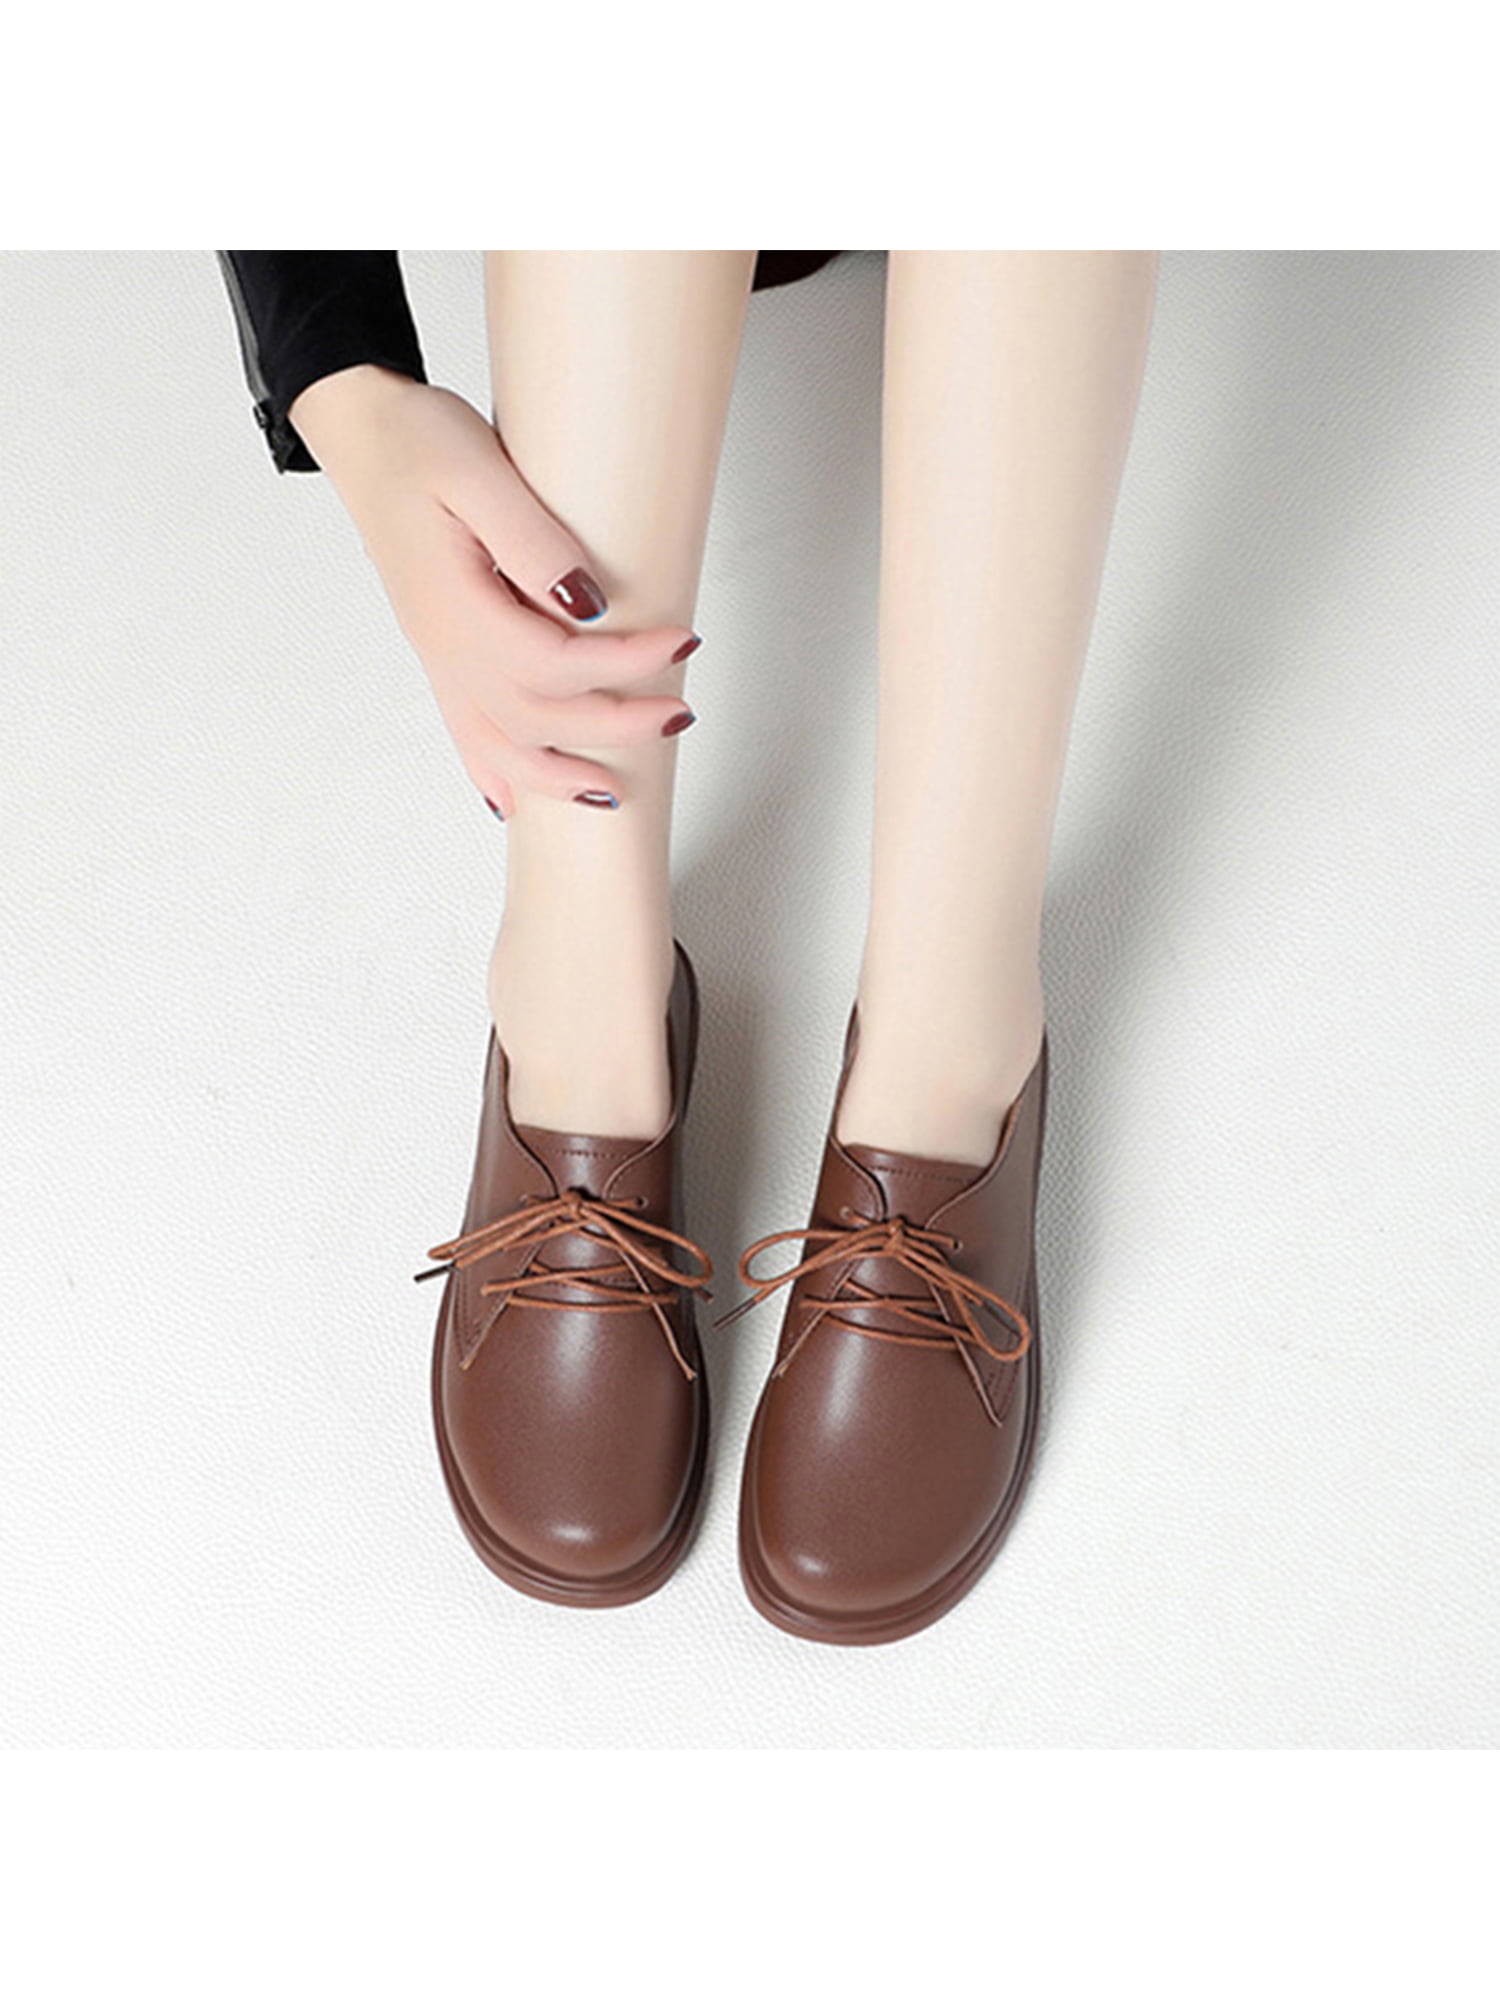  Women's Dress Oxford Shoes Fashion Pointed Toe Work Shoes  Comfortable Block Low Heels Classic Lace Up Brogue Shoes Brown